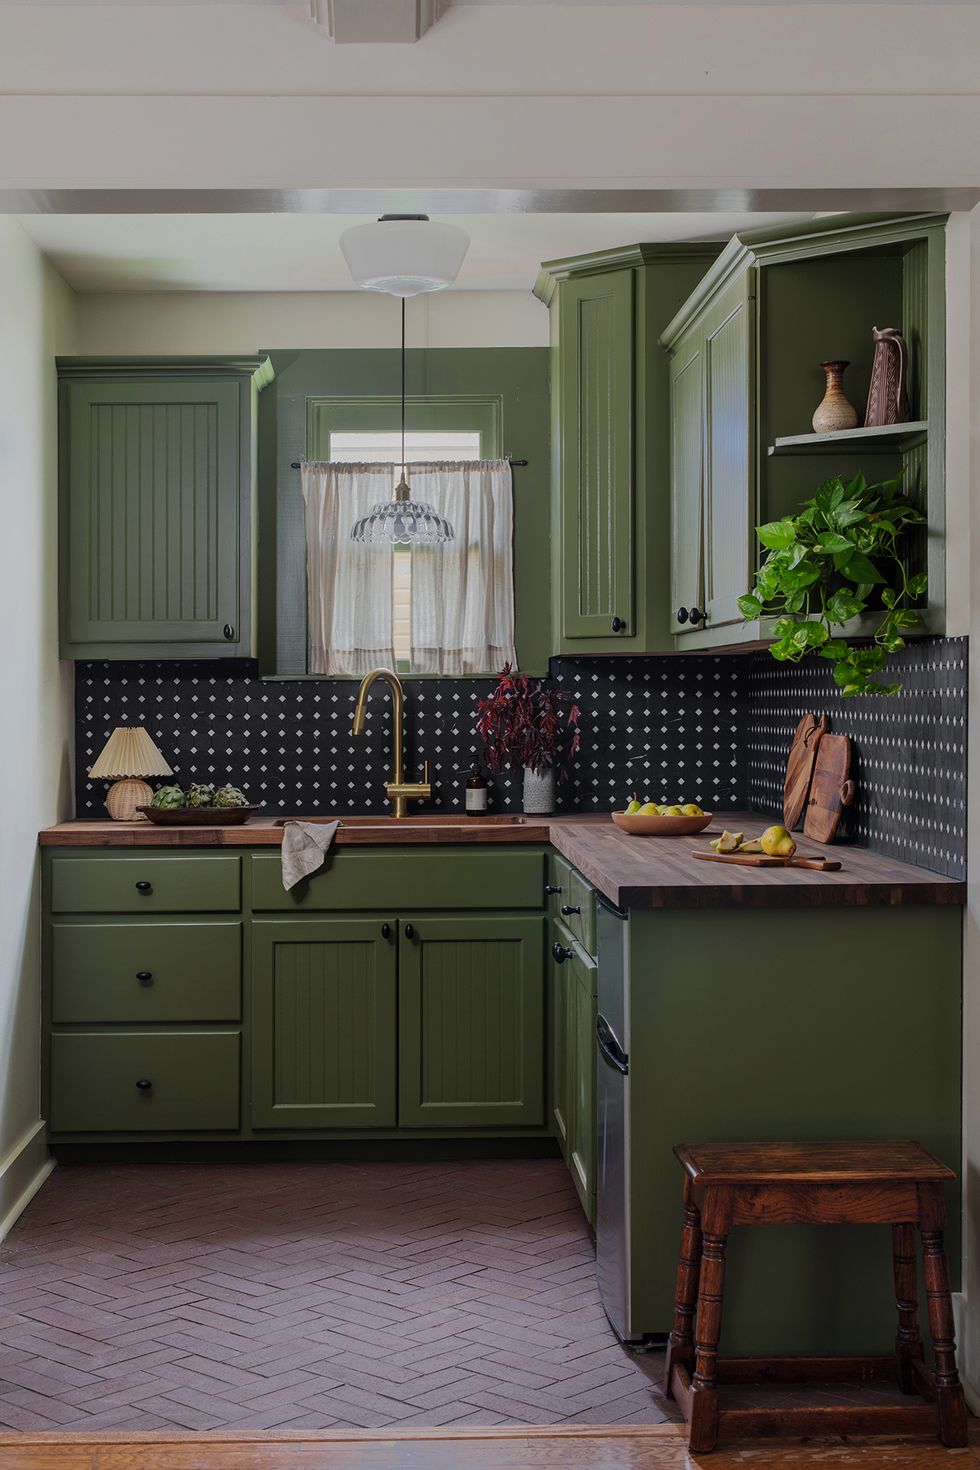 69 Creative Kitchen Cabinet Ideas to Refresh Your Space